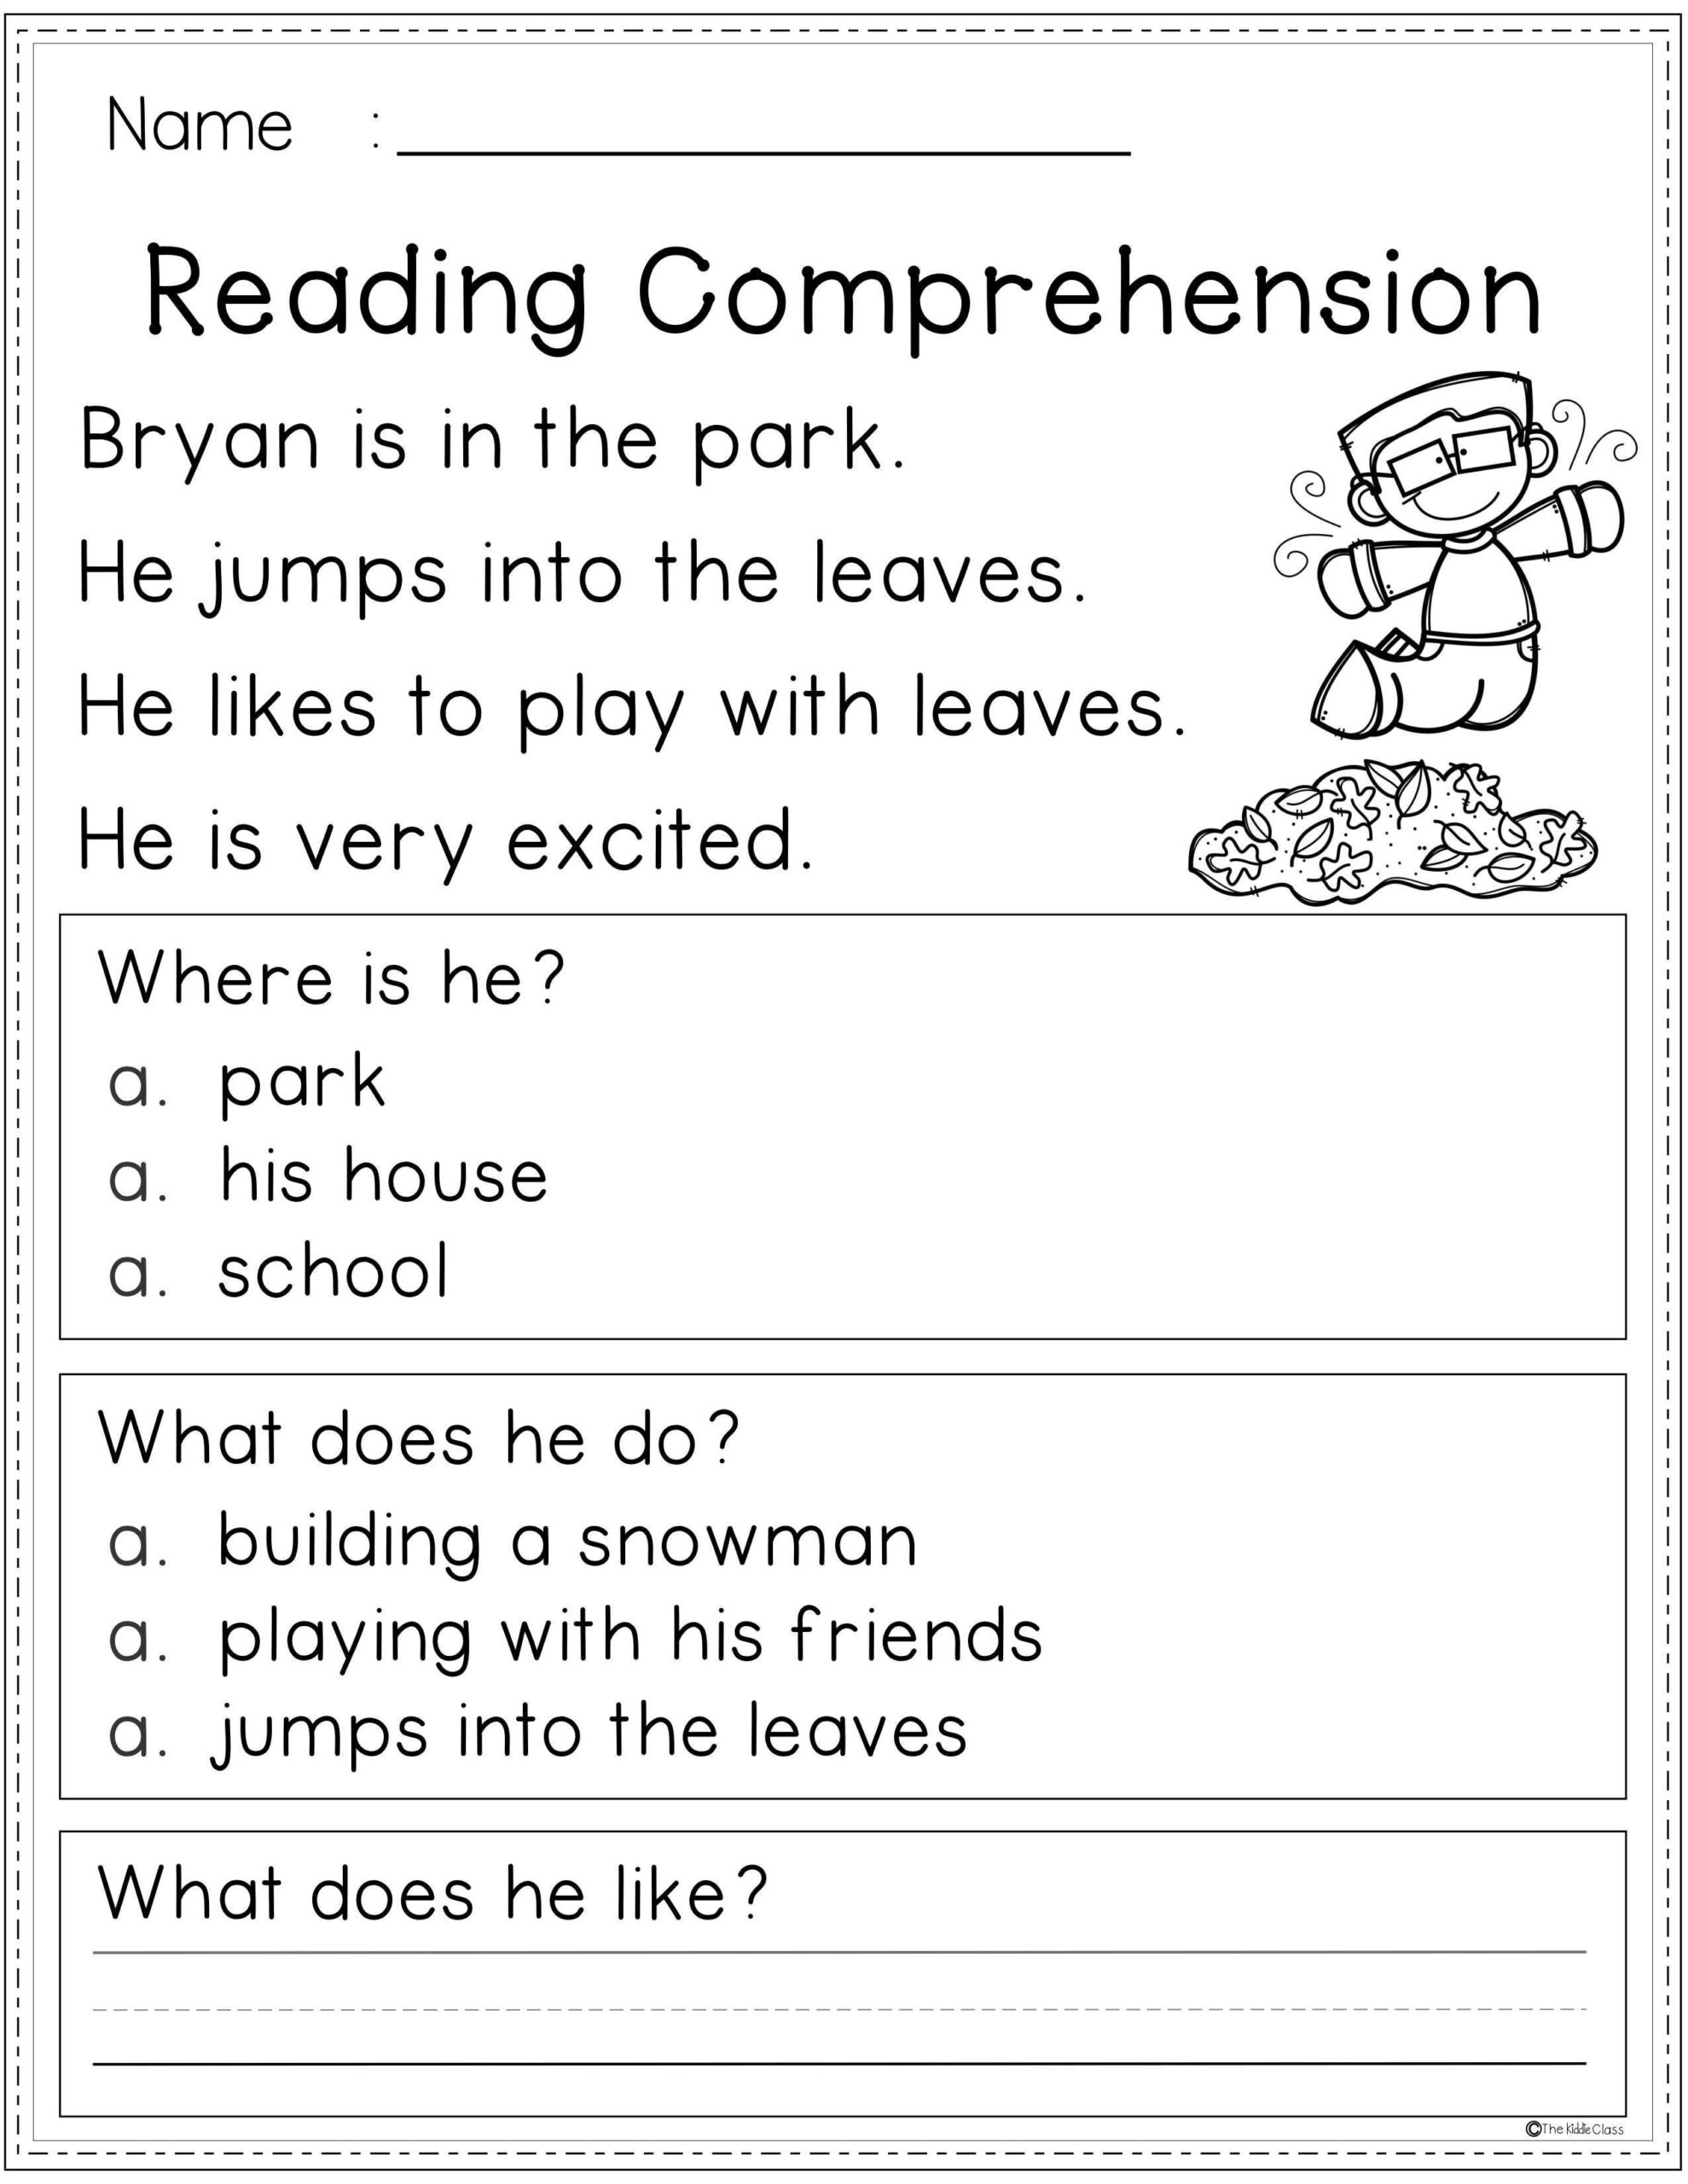 Free Reading Comprehension First Grade Reading Comprehension Reading Compre Reading Comprehension Worksheets Reading Comprehension 1st Grade Reading Worksheets